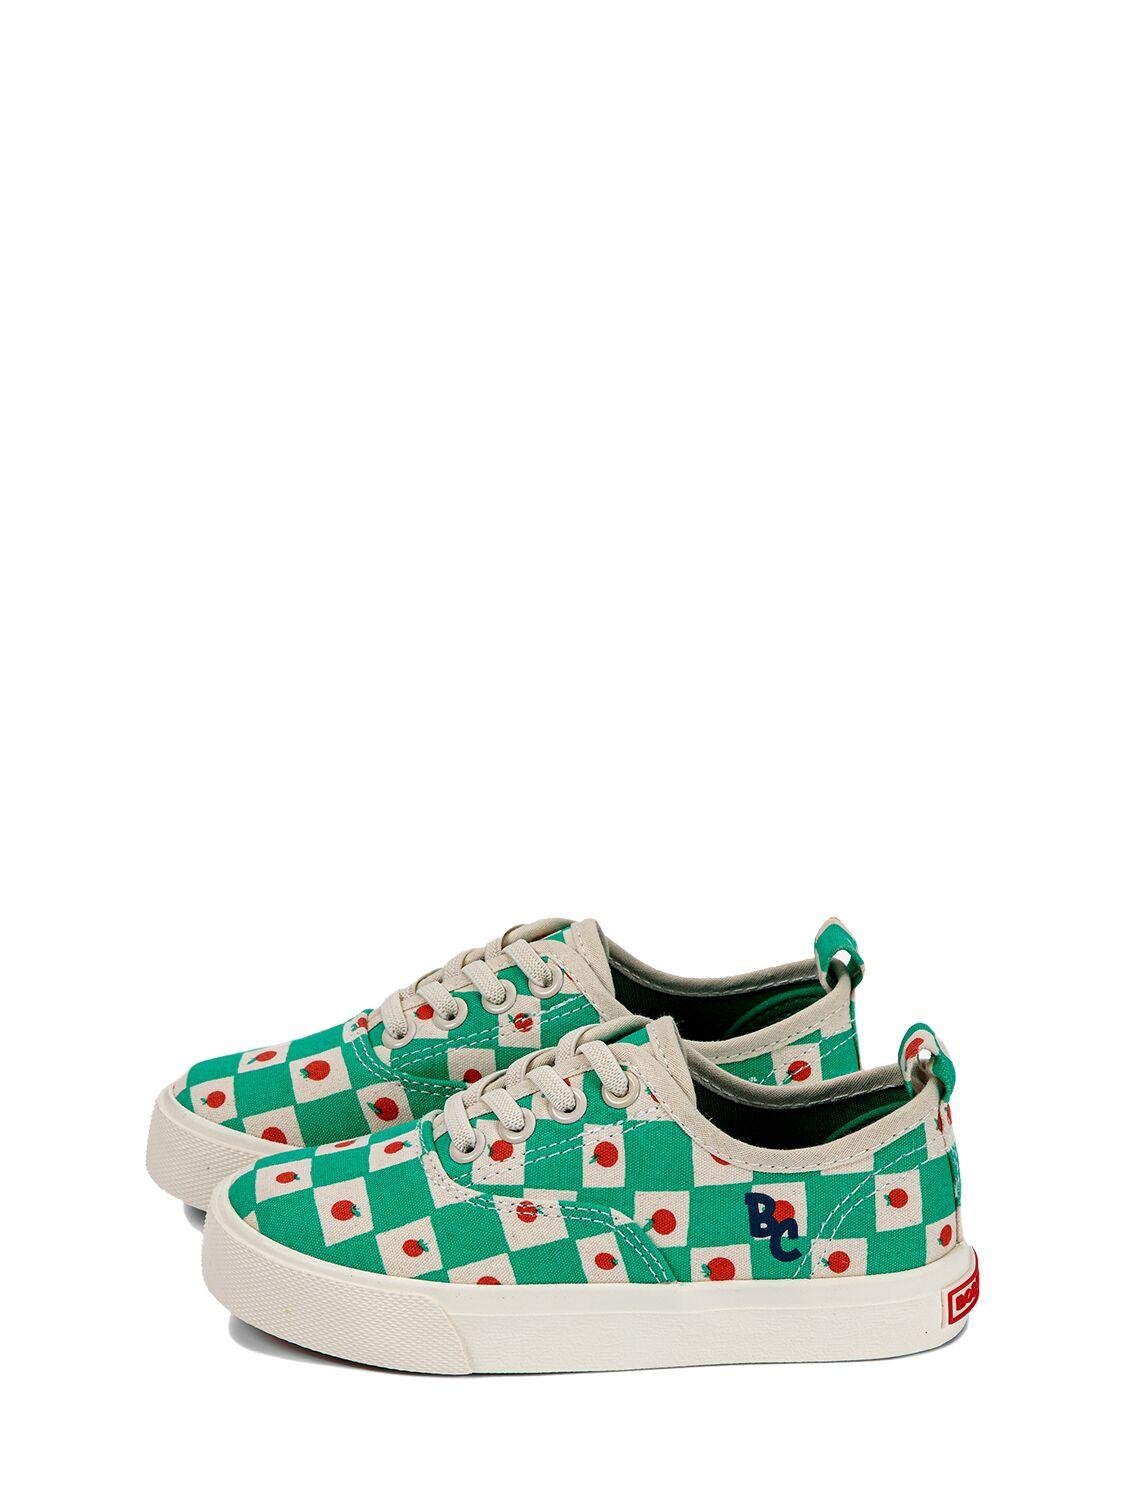 Printed Organic Cotton Lace-up Sneakers by BOBO CHOSES